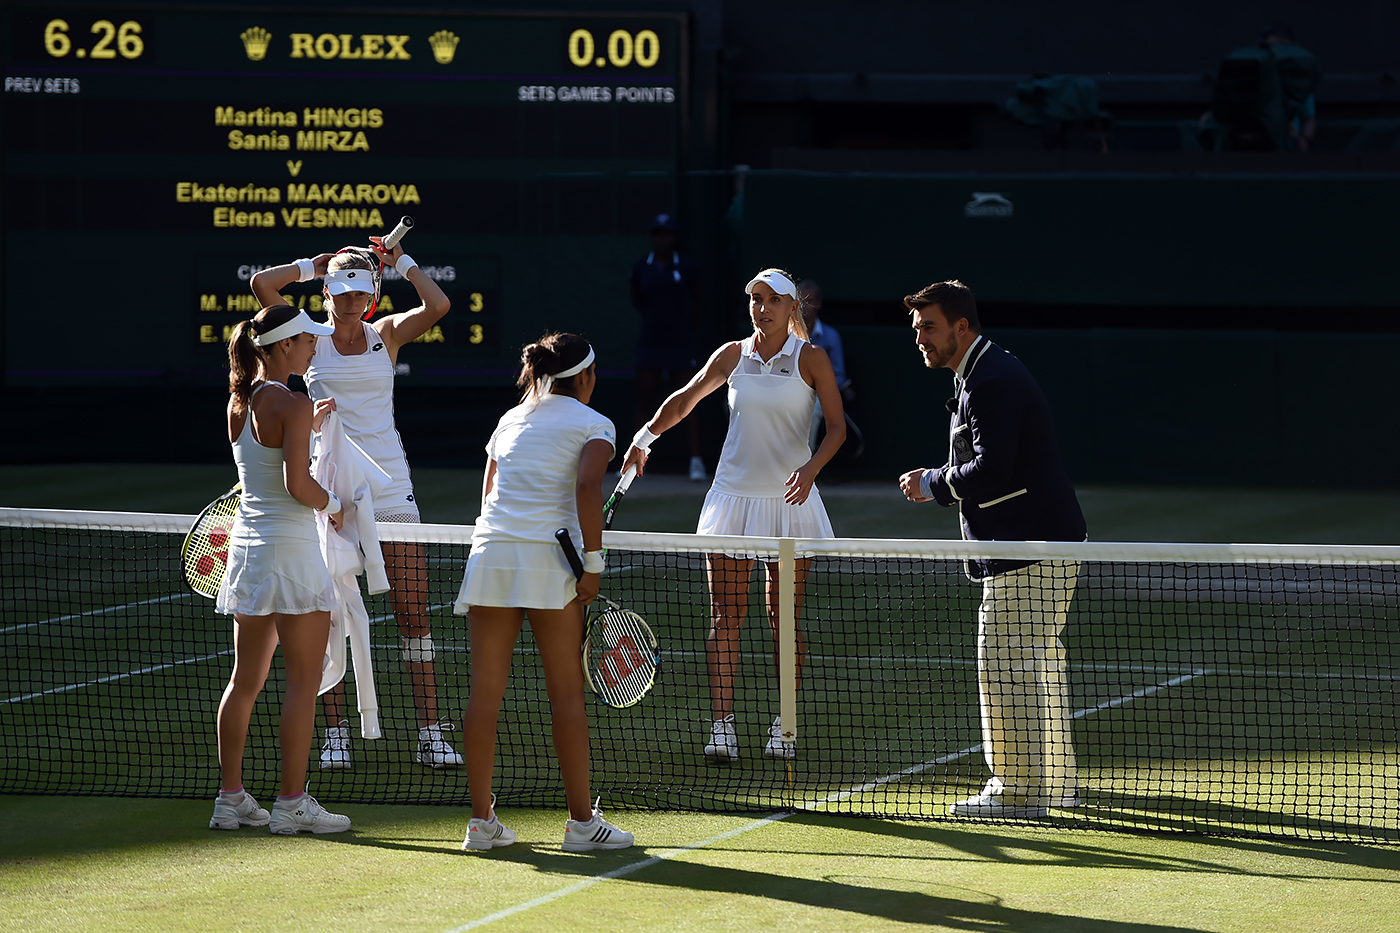 Hingis and Mirza are Ladies' Doubles Champions The Championships